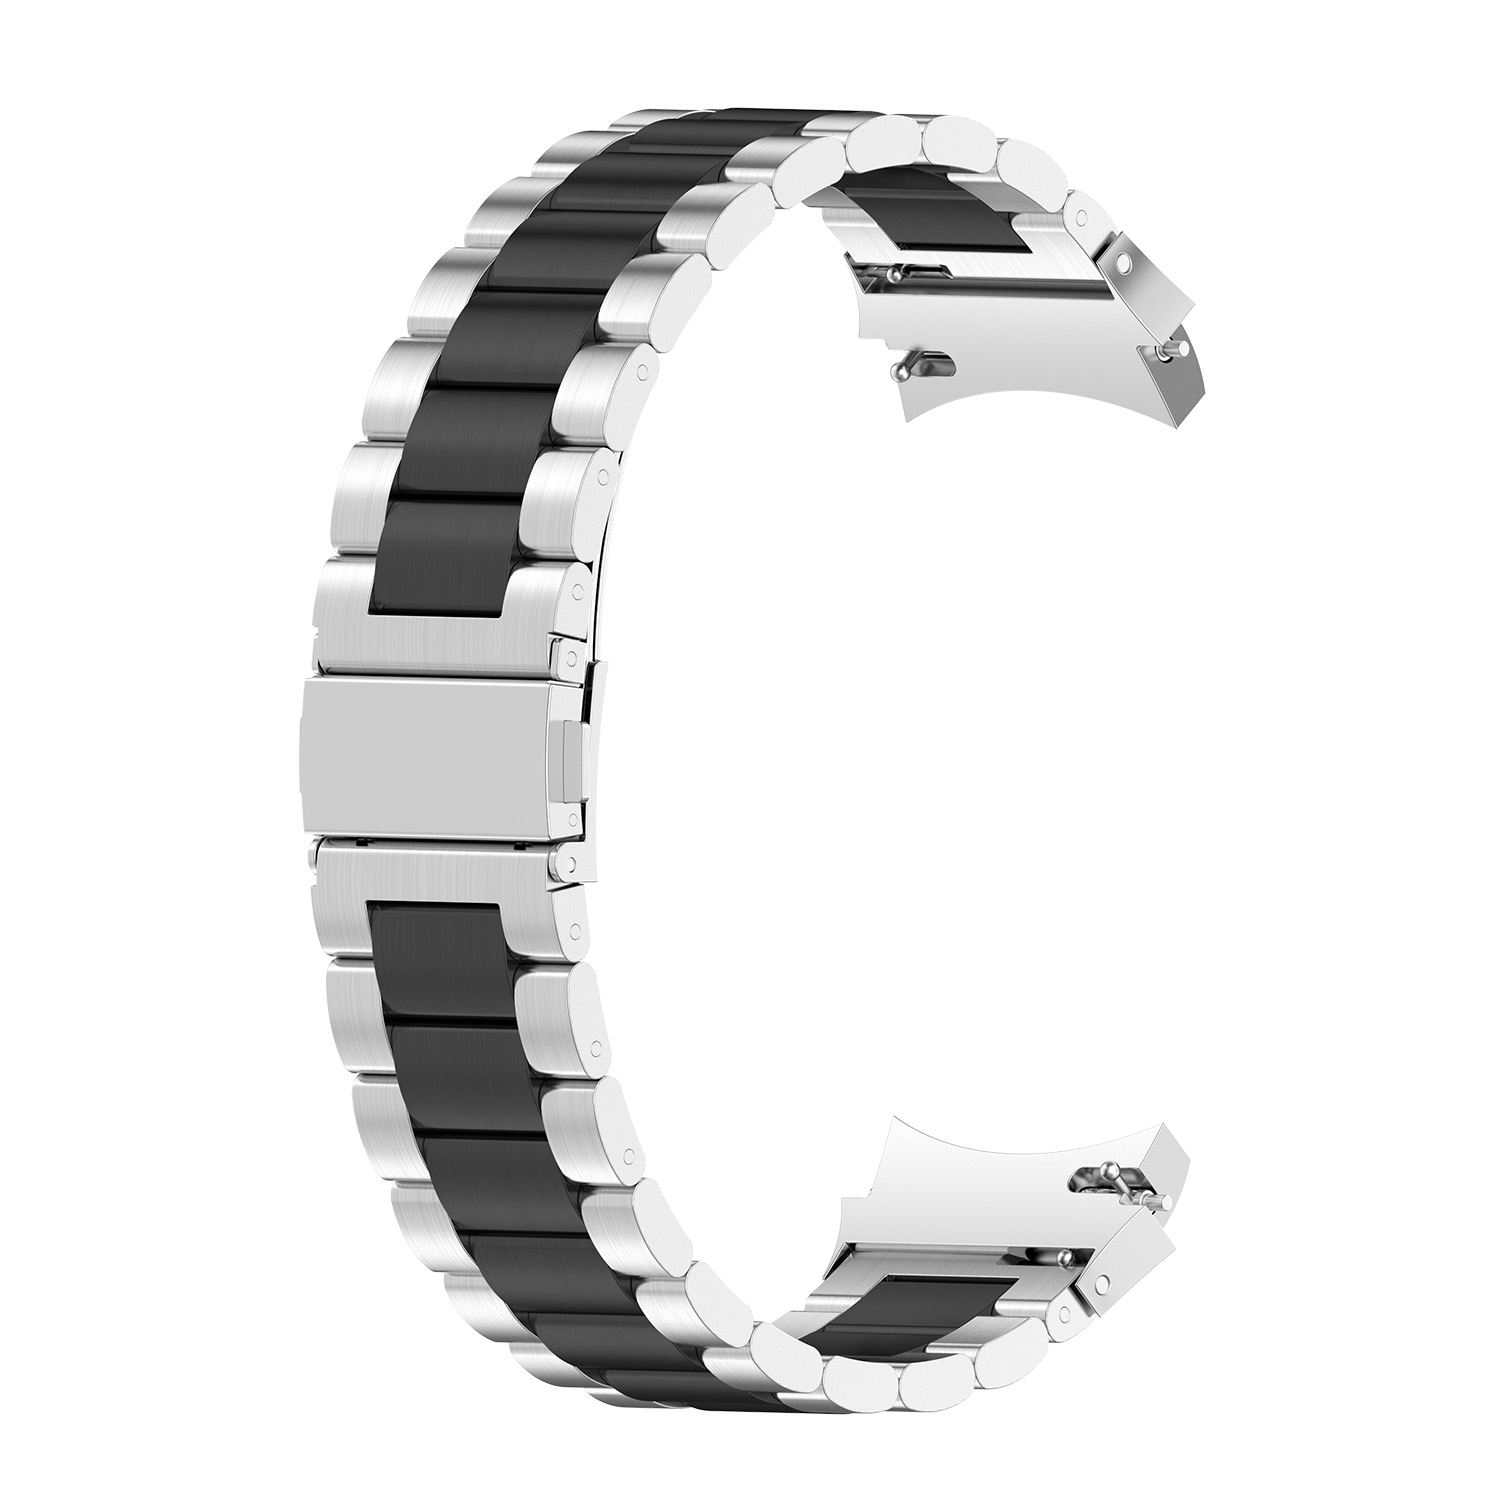 Bakeey-20mm-Universal-Stainless-Steel-Watch-Band-Strap-Replacement-for-Samsung-Galaxy-Watch-4-40MM44-1891327-8